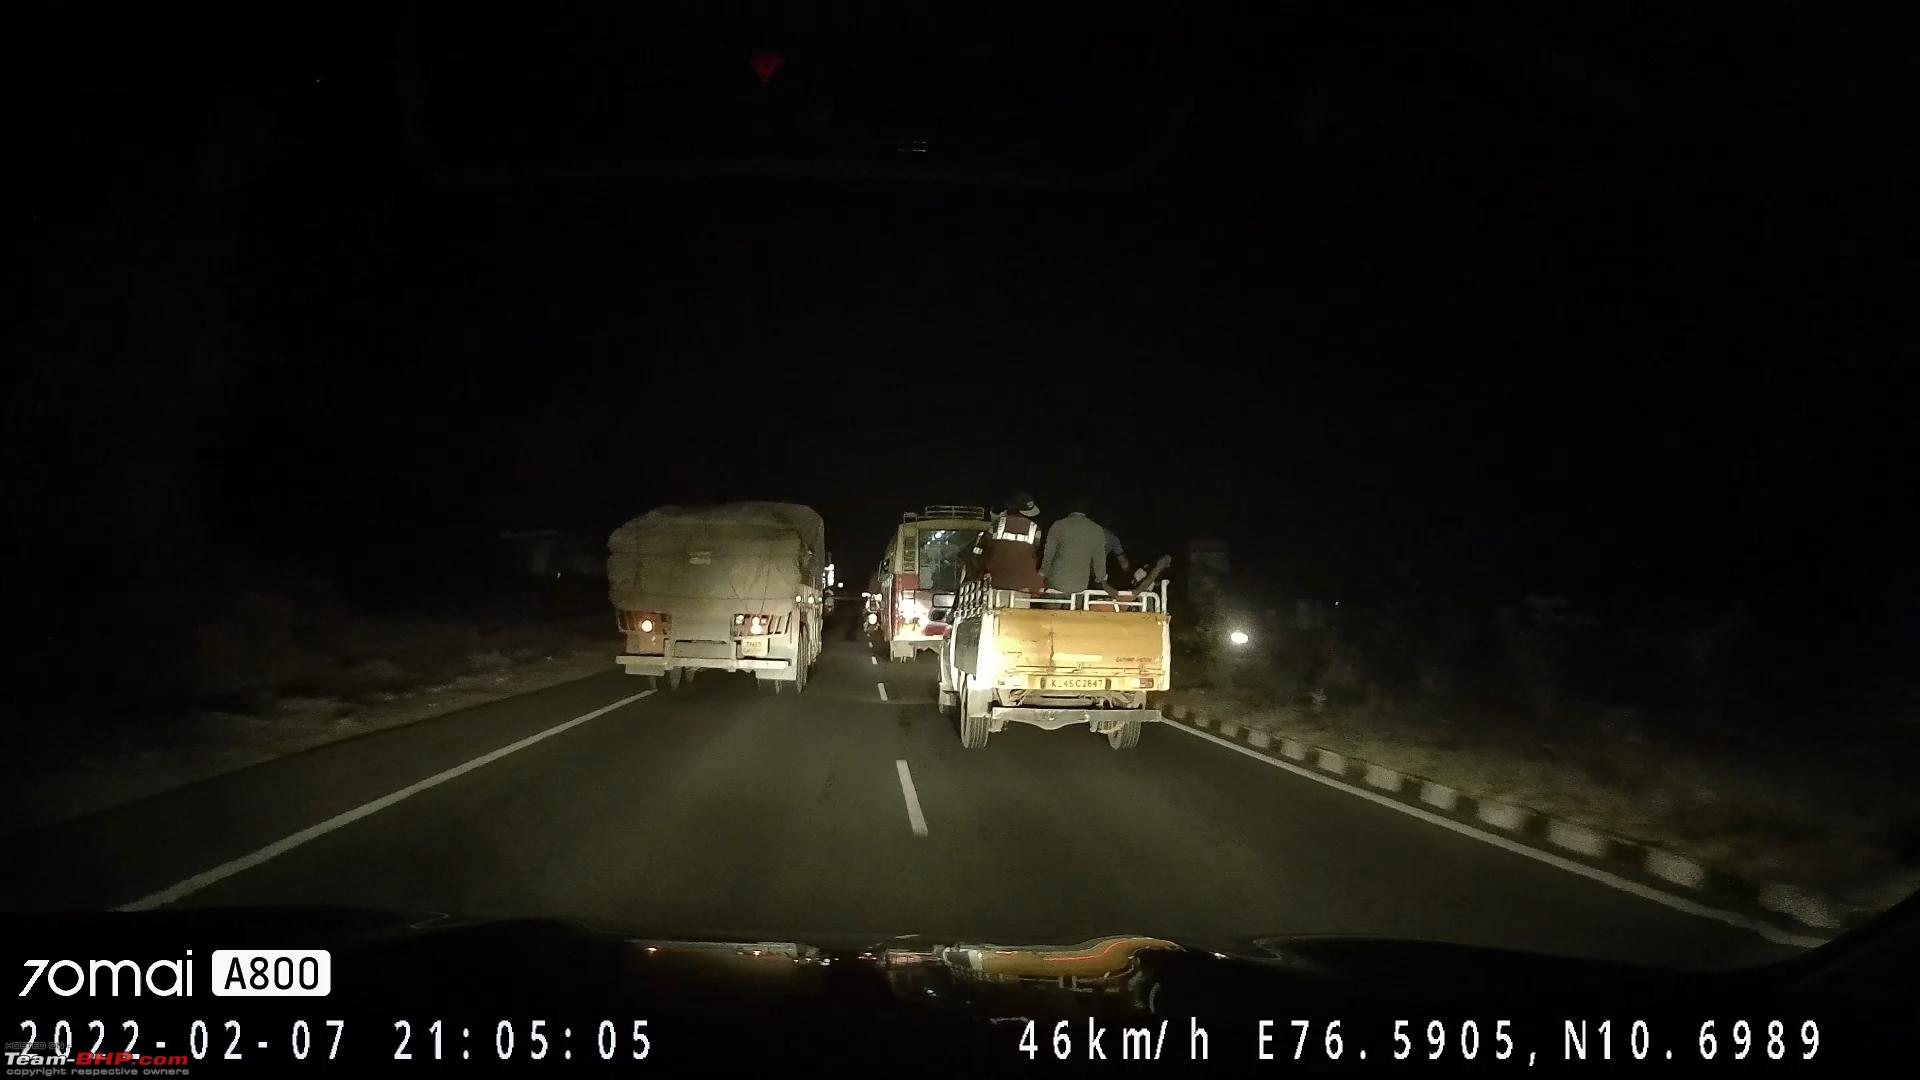 https://www.team-bhp.com/forum/attachments/road-safety/2271315d1644575158-dashcam-reveals-horrible-accident-caused-ksrtc-driver-killing-two-youths-01.png